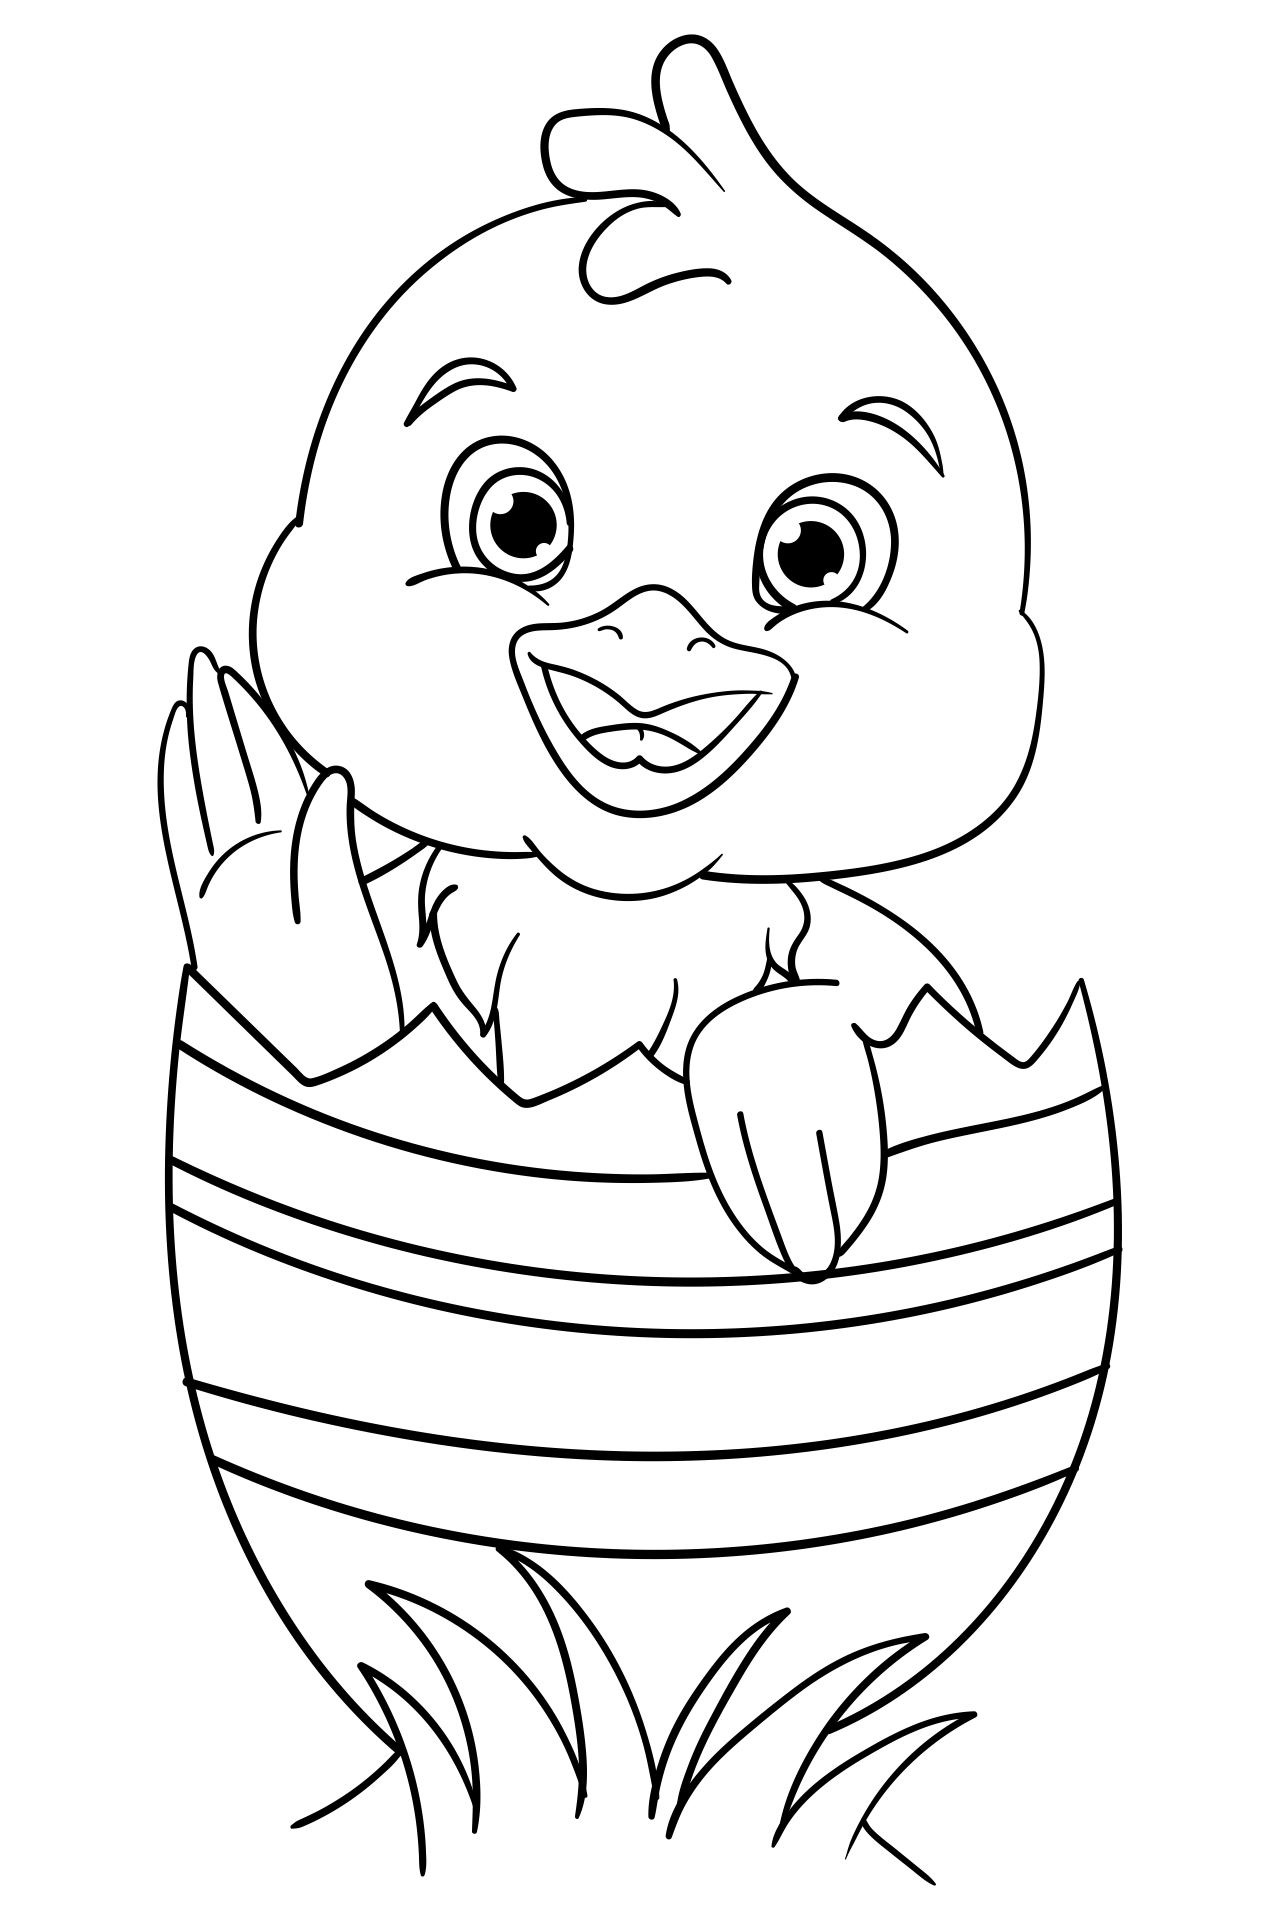 Printable Easter Chick Coloring Pages